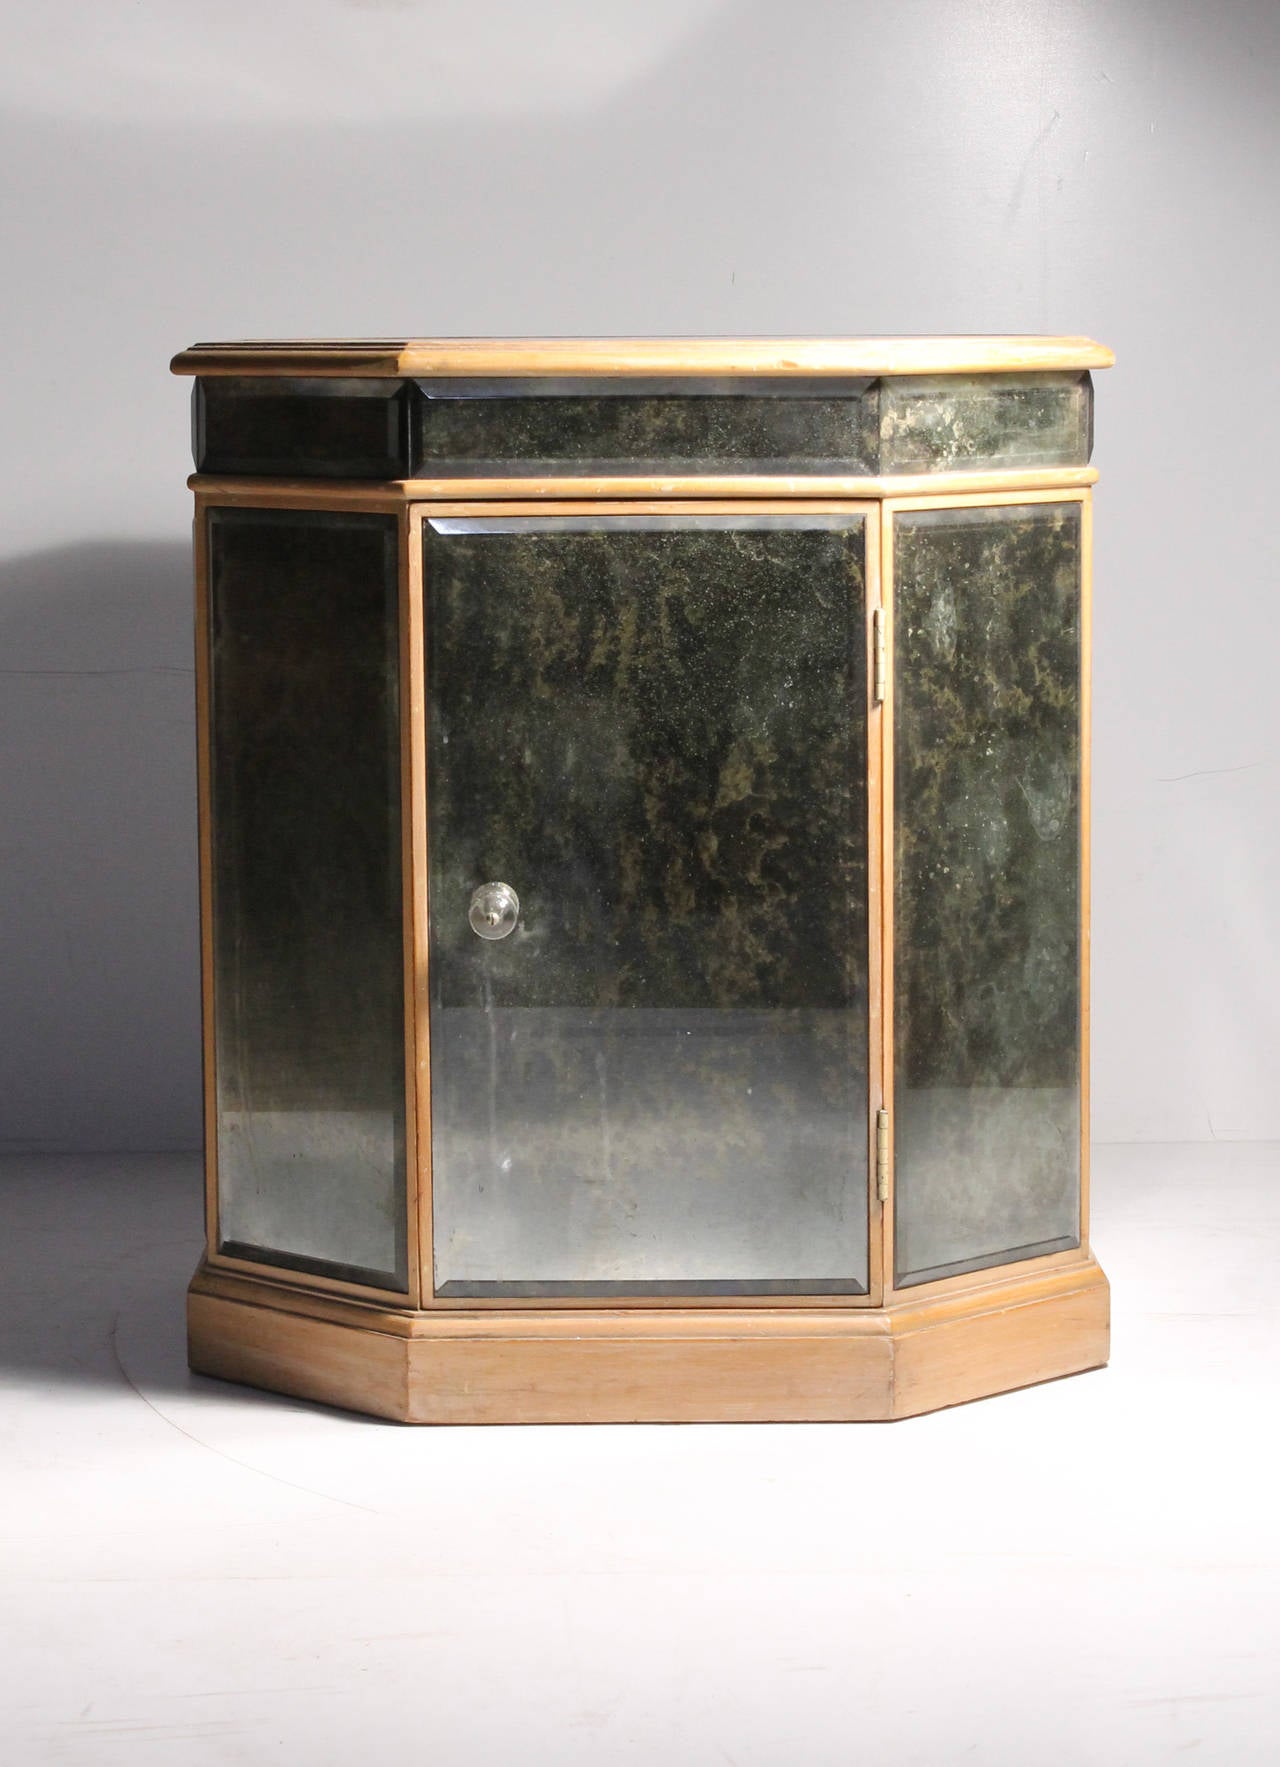 Vintage mirrored octagon occasional table cabinet attributed to Grosfeld House. Lucite sphere pull. A Deco style. May complement well in a Dorothy Draper Interior.